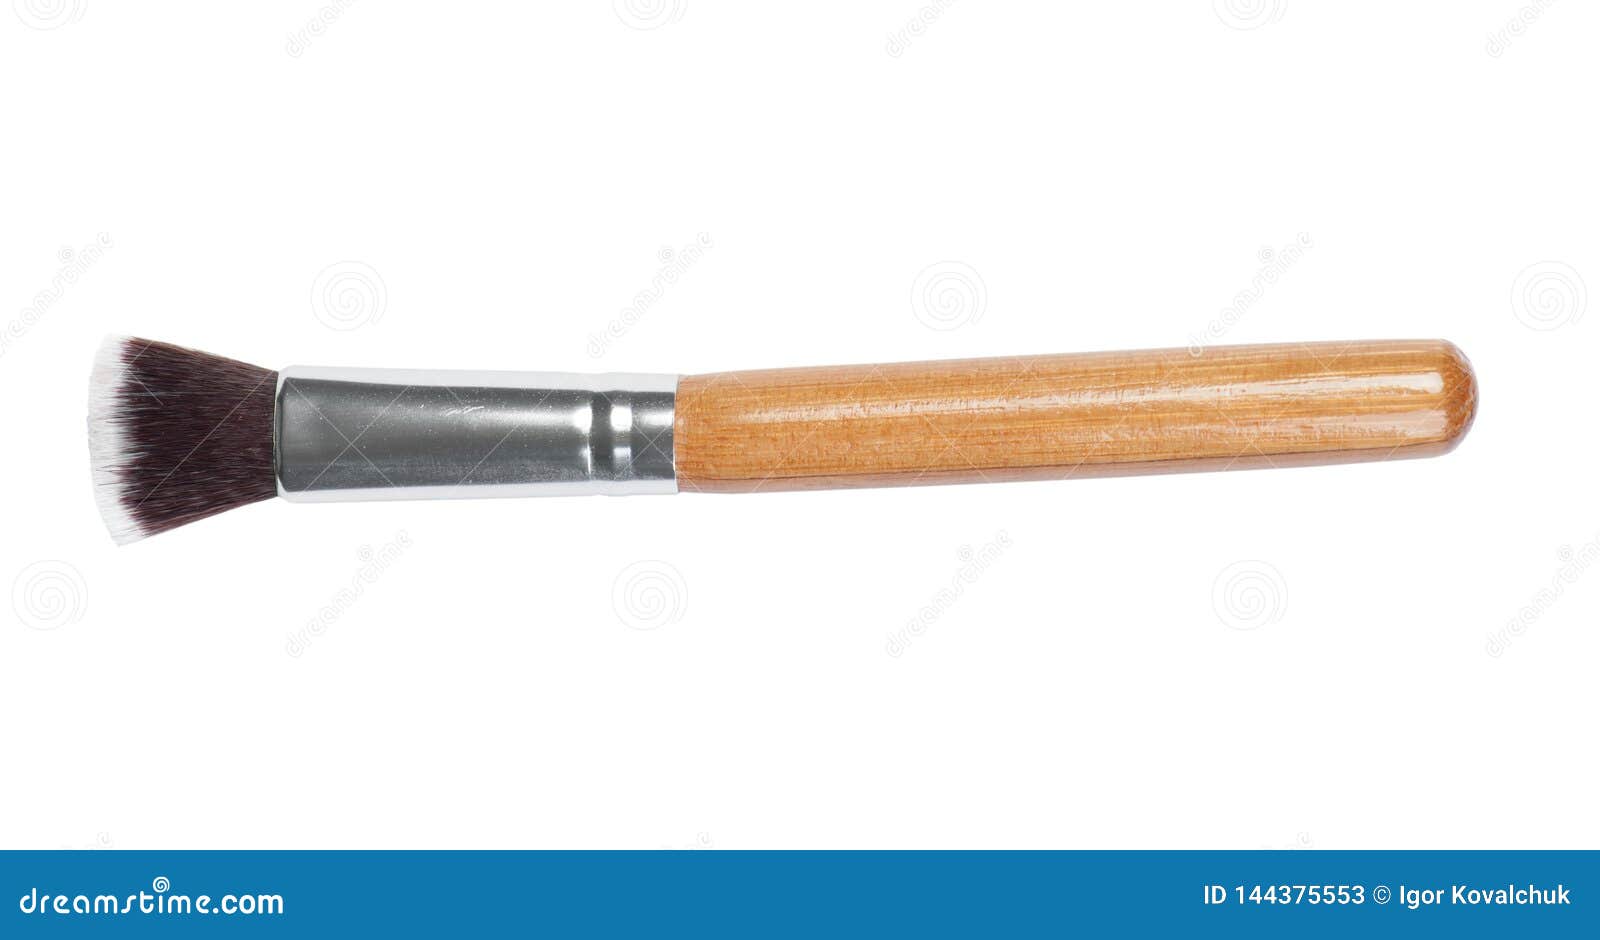 Thick Wooden Paint Brush Stock Image Image Of Object 144375553